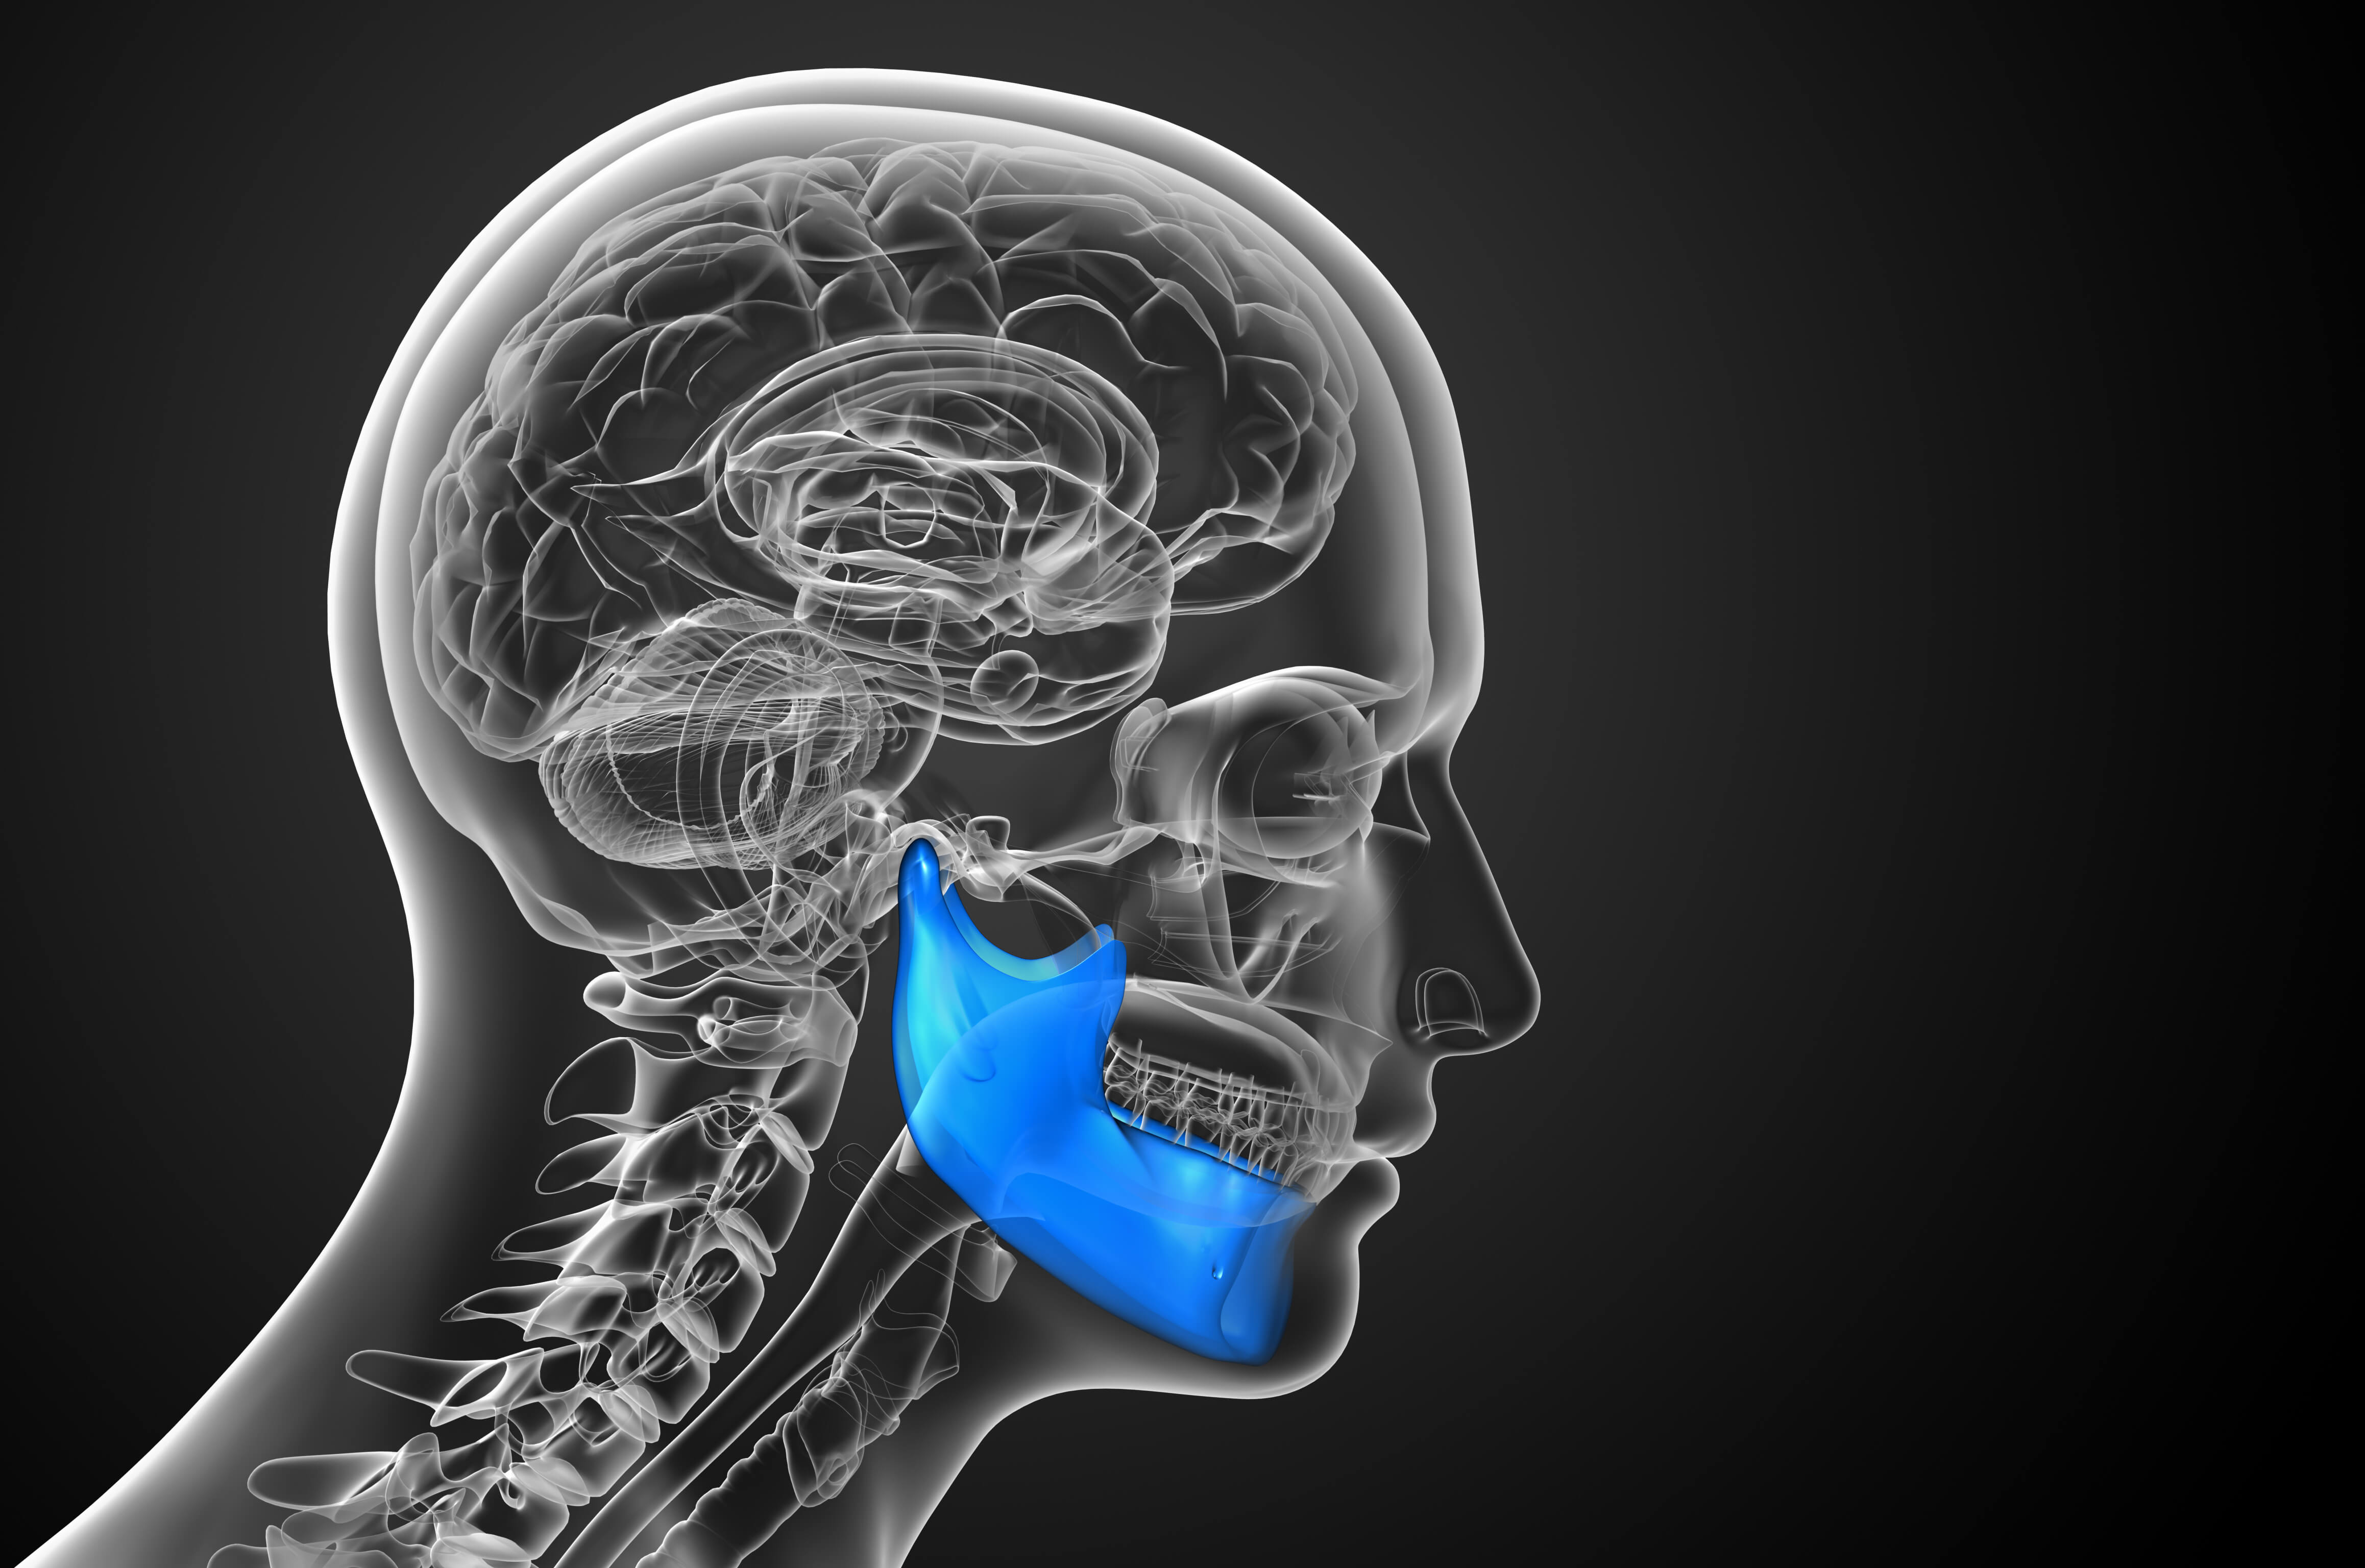 realign your misaligned jaw and book an appointment with an orthodontist